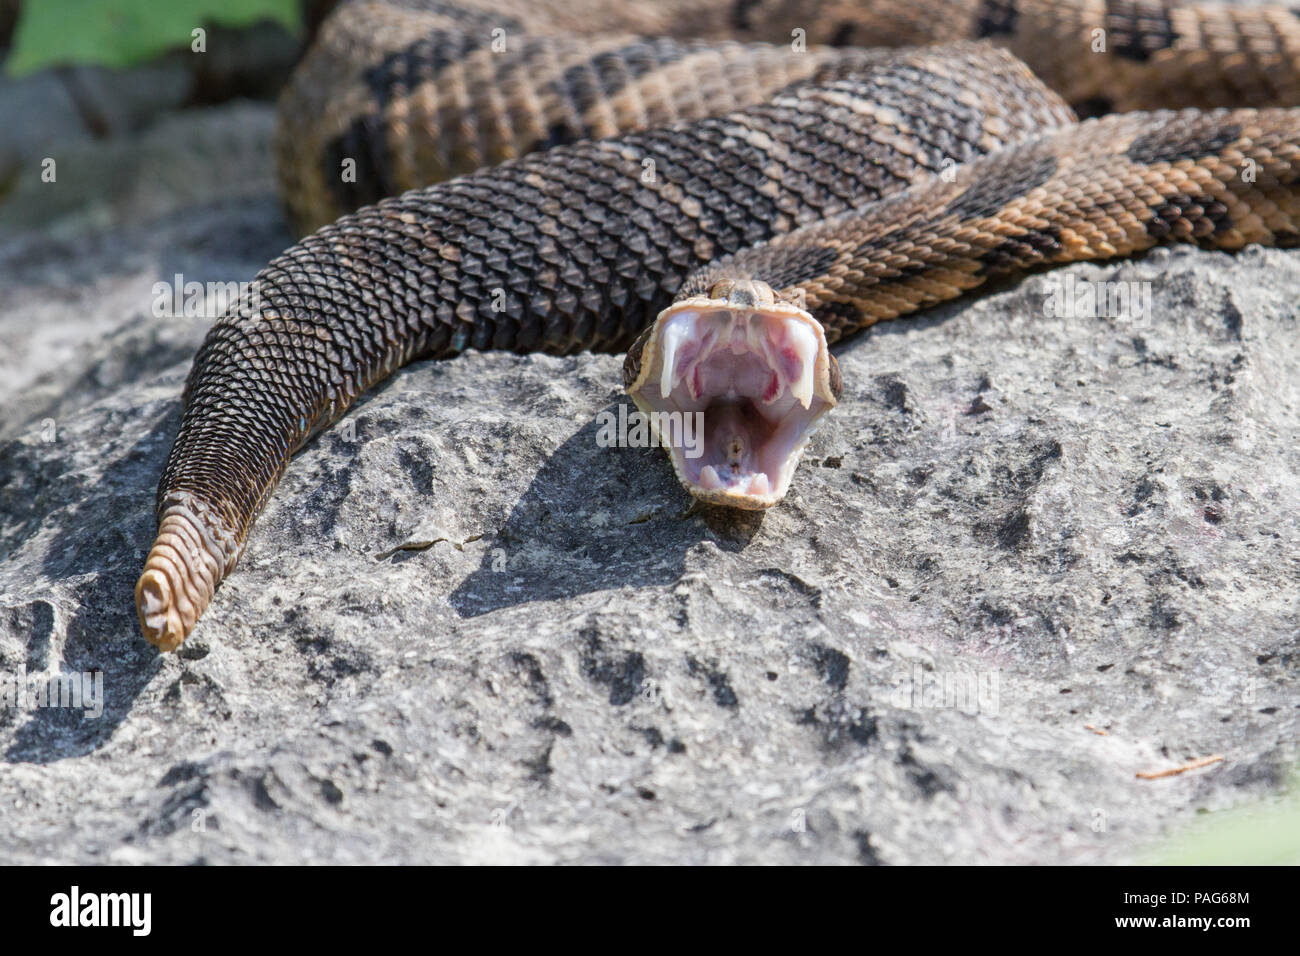 A canebrake rattlesnake, Crotalus horridus, resetting its jaws and showing the membrane covered fangs. Stock Photo